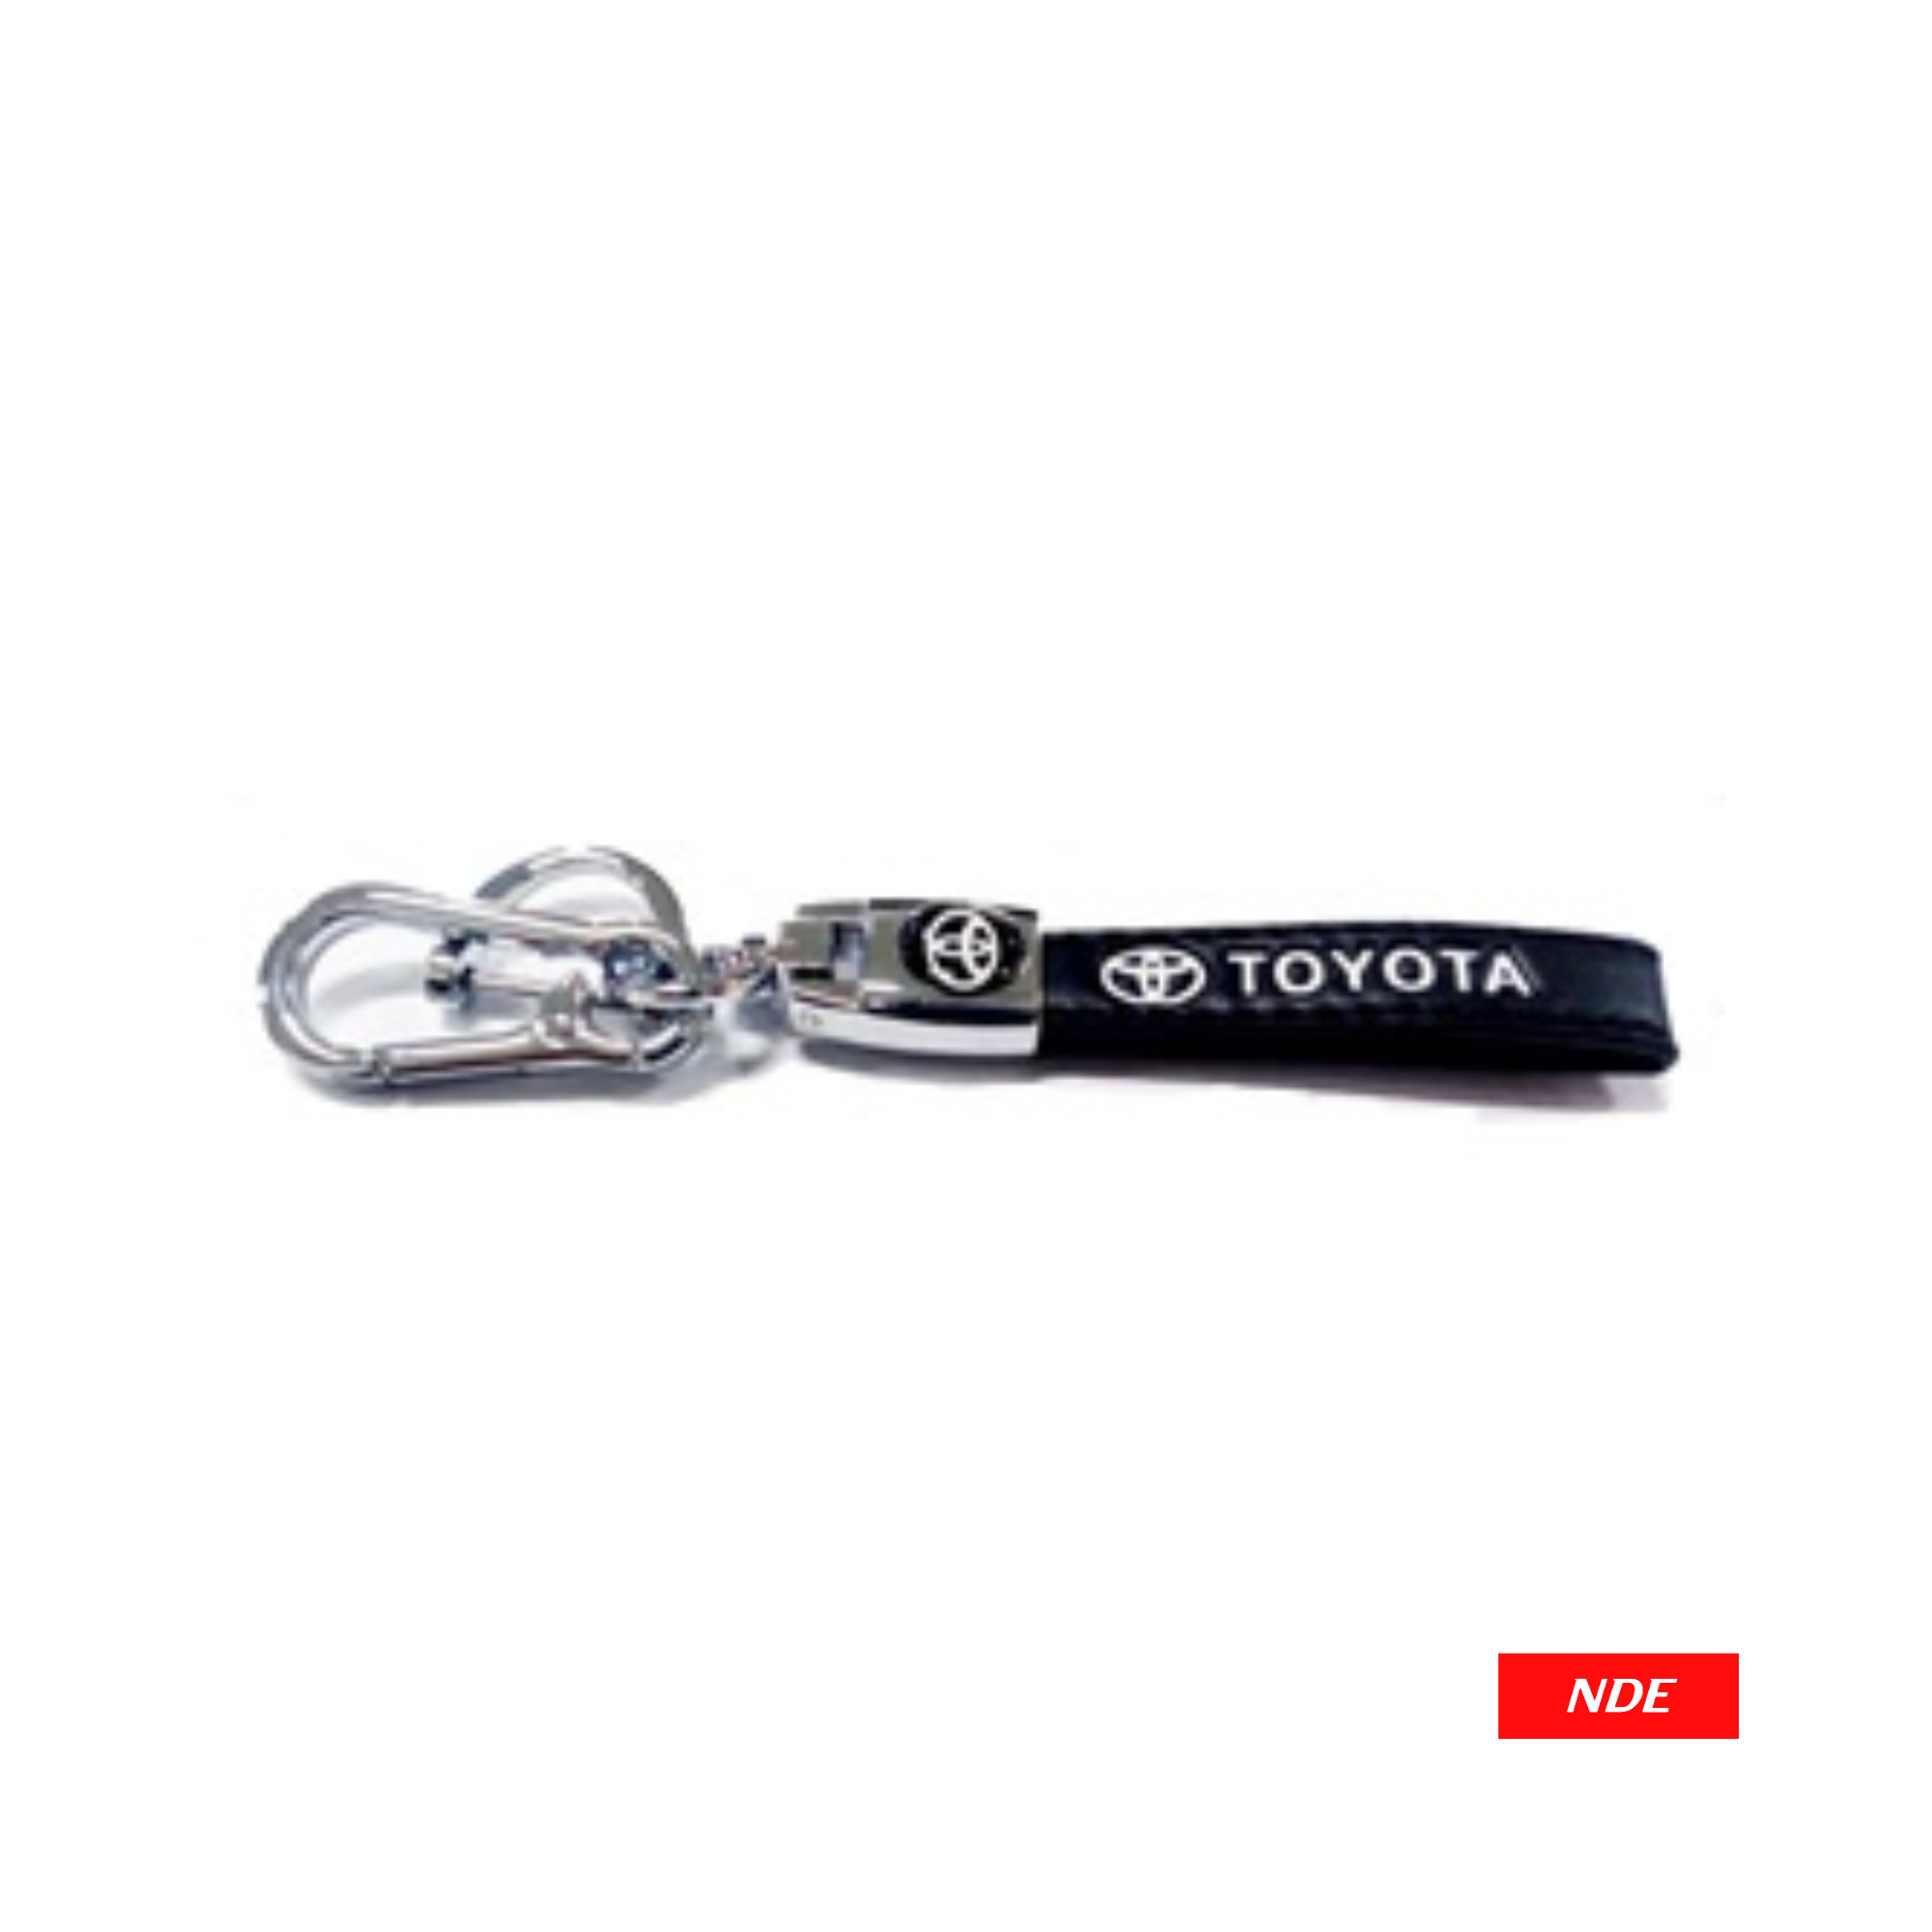 KEY CHAIN FOR TOYOTA